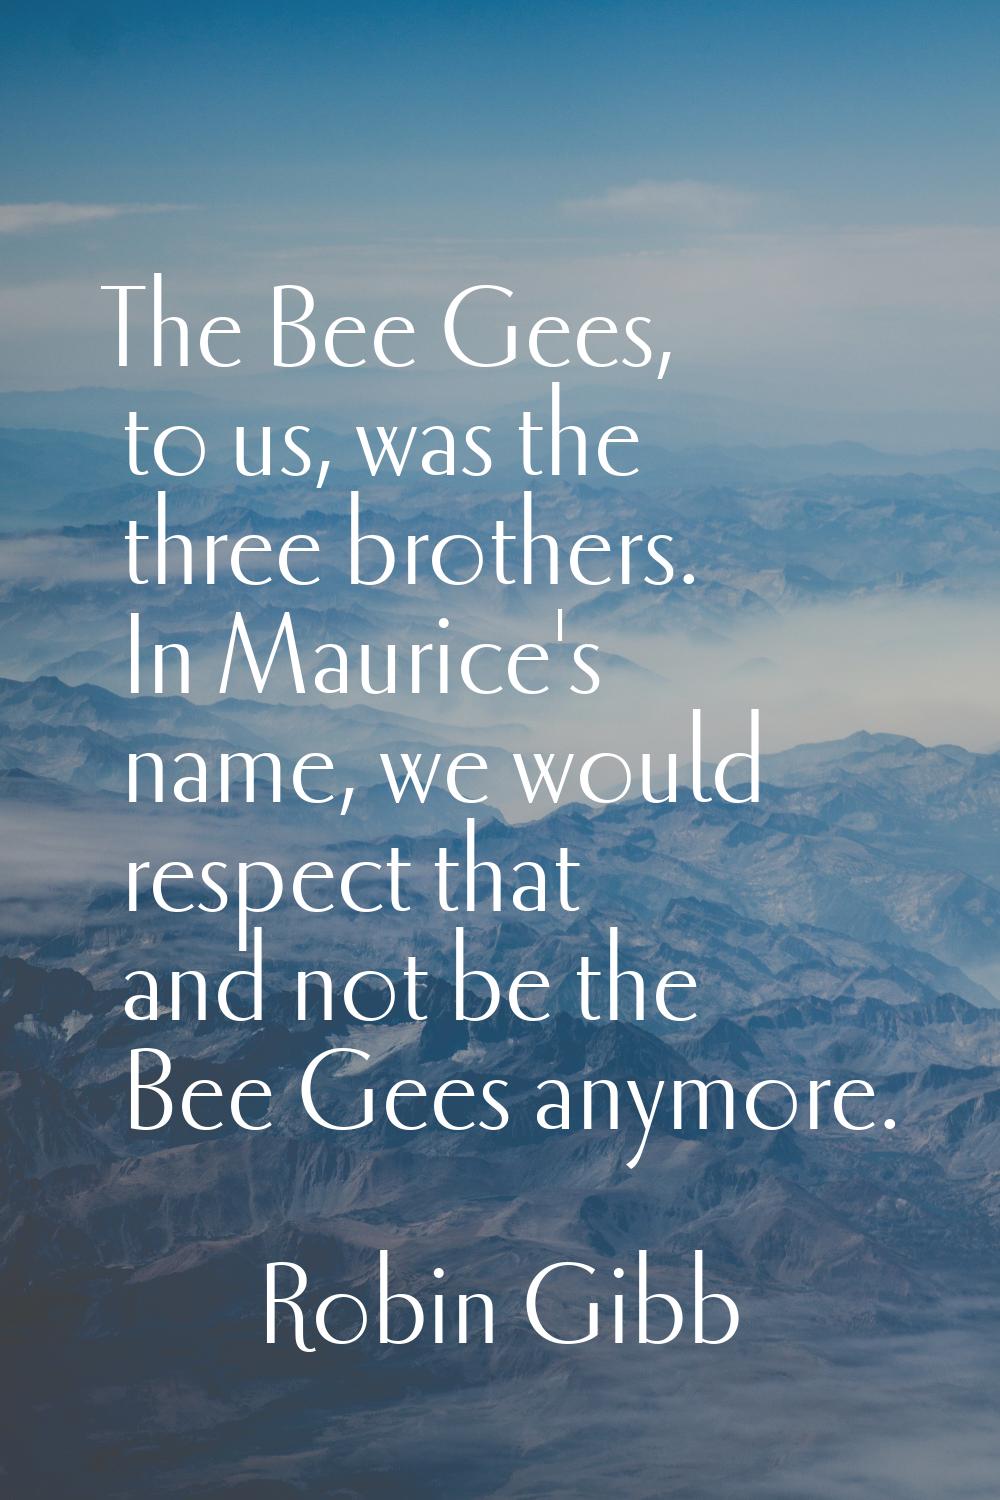 The Bee Gees, to us, was the three brothers. In Maurice's name, we would respect that and not be th